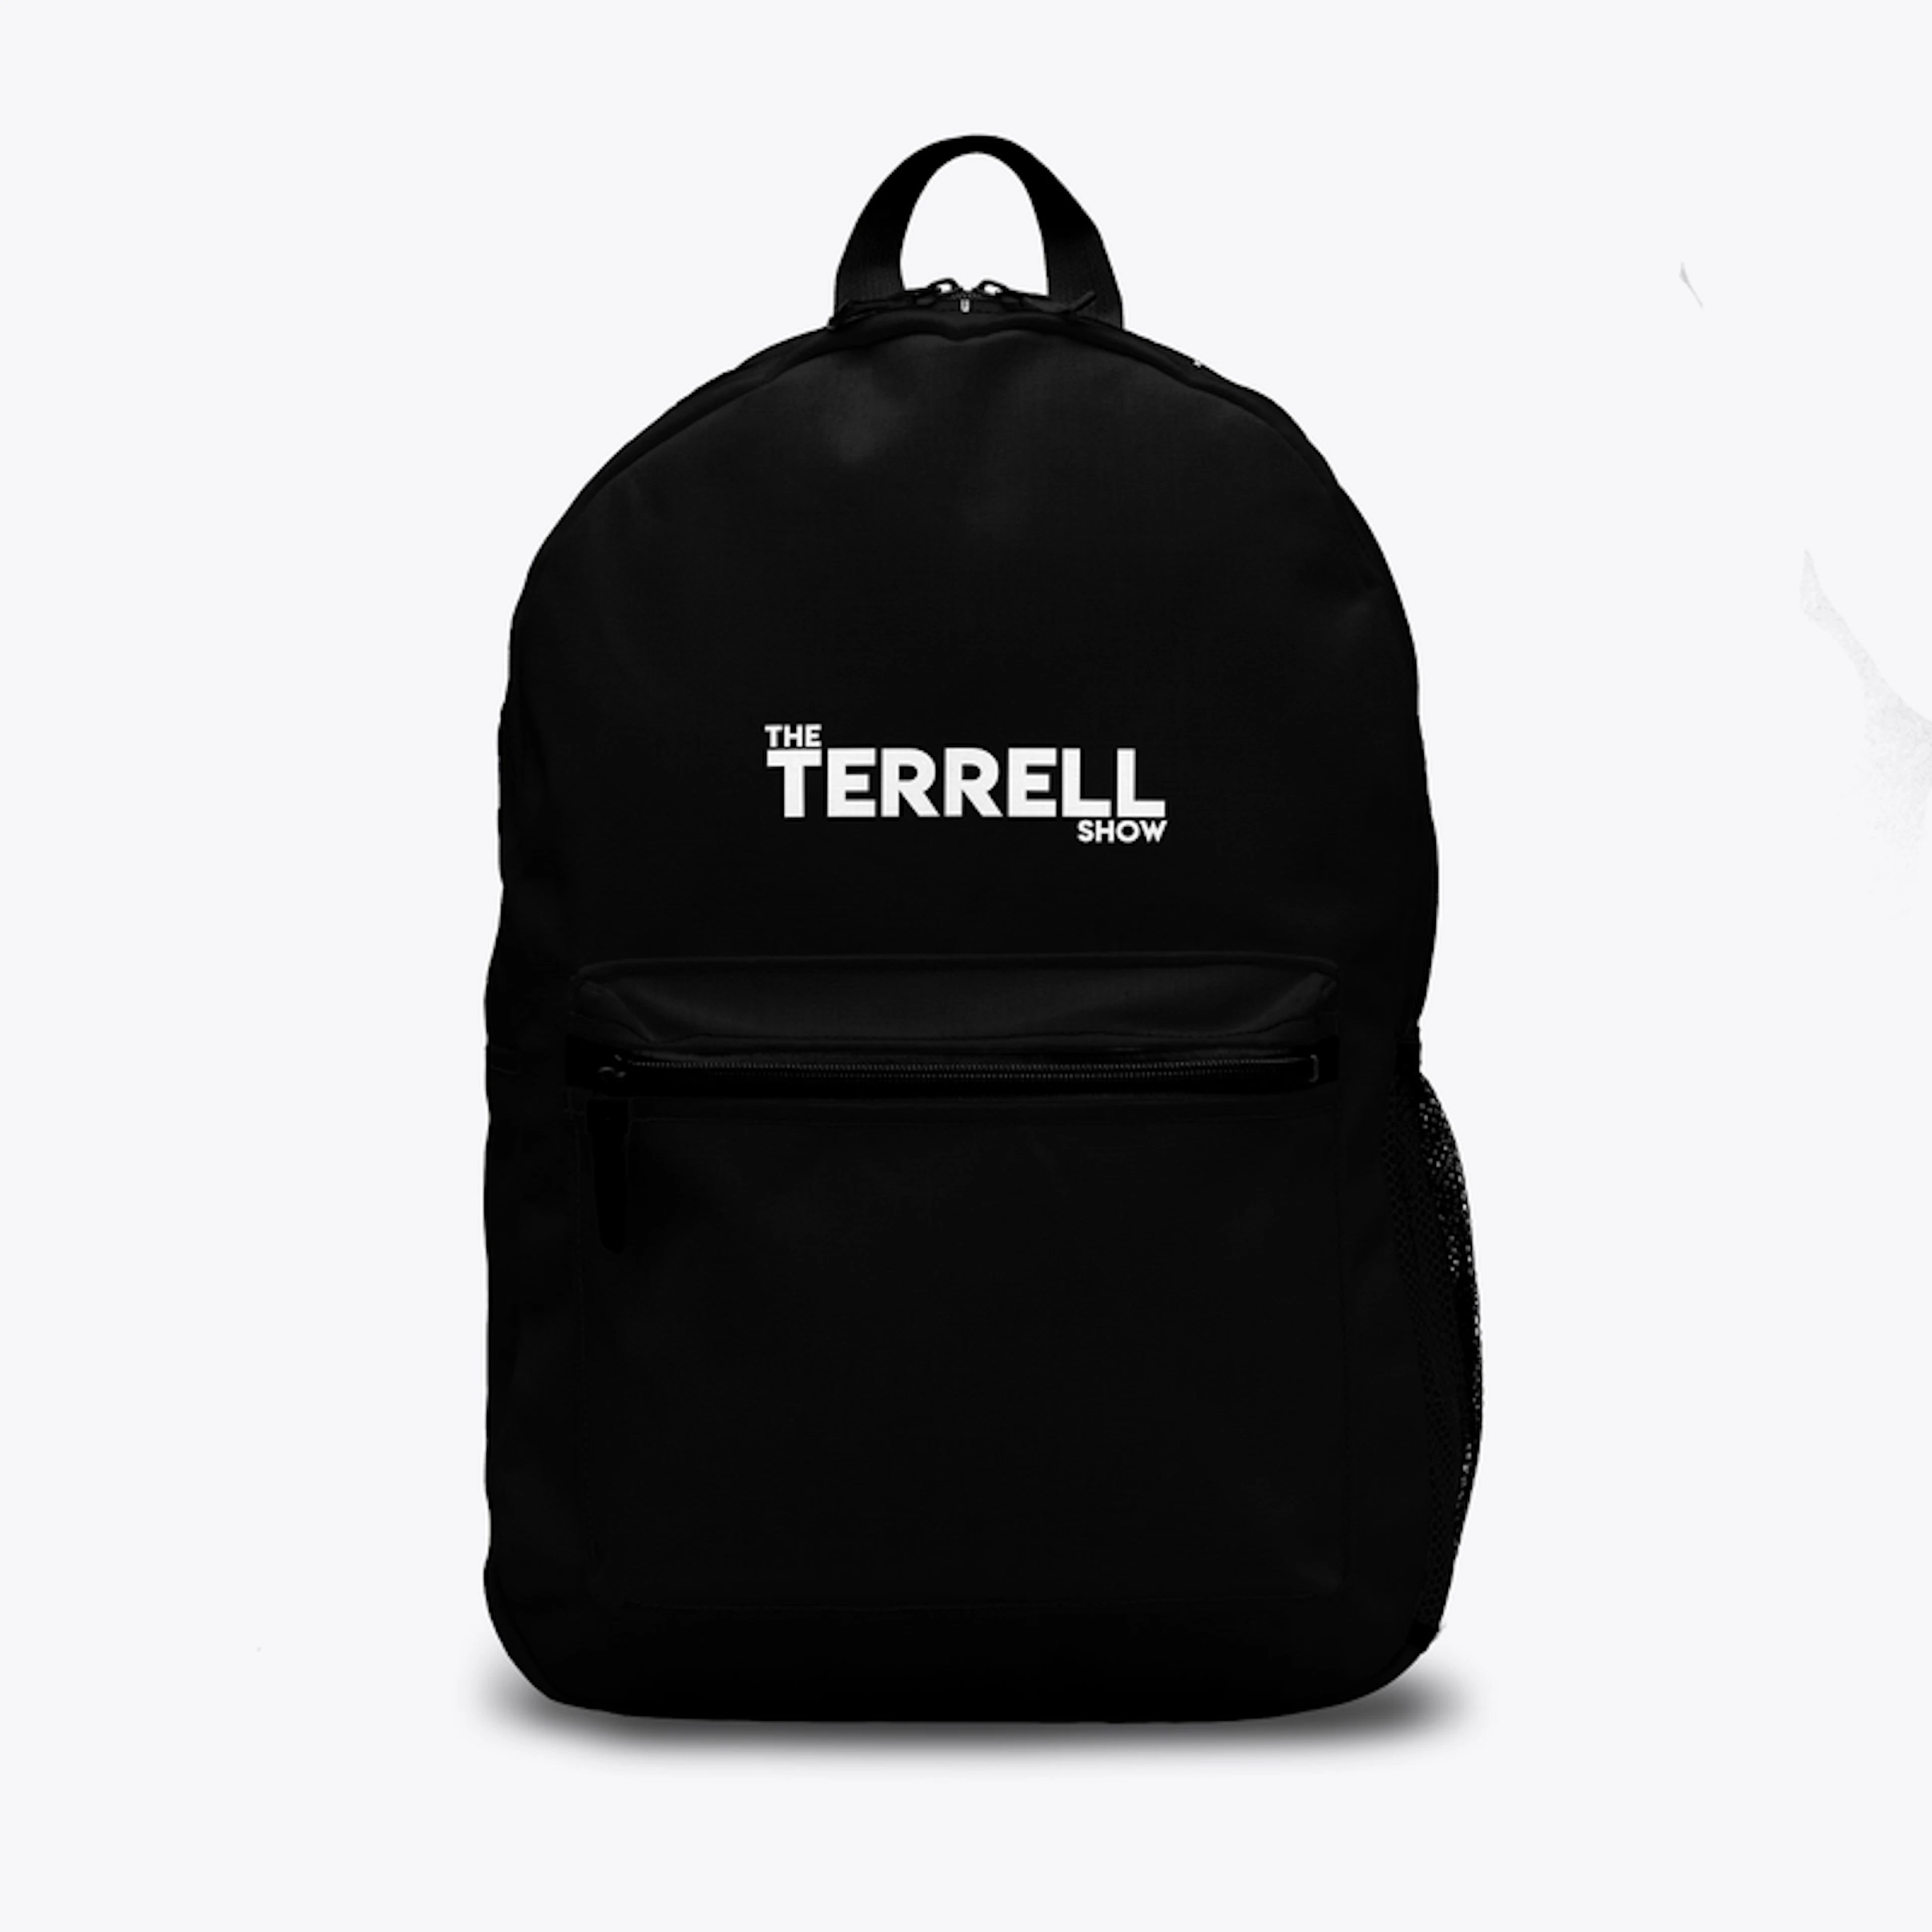 The TERRELL Show Backpack